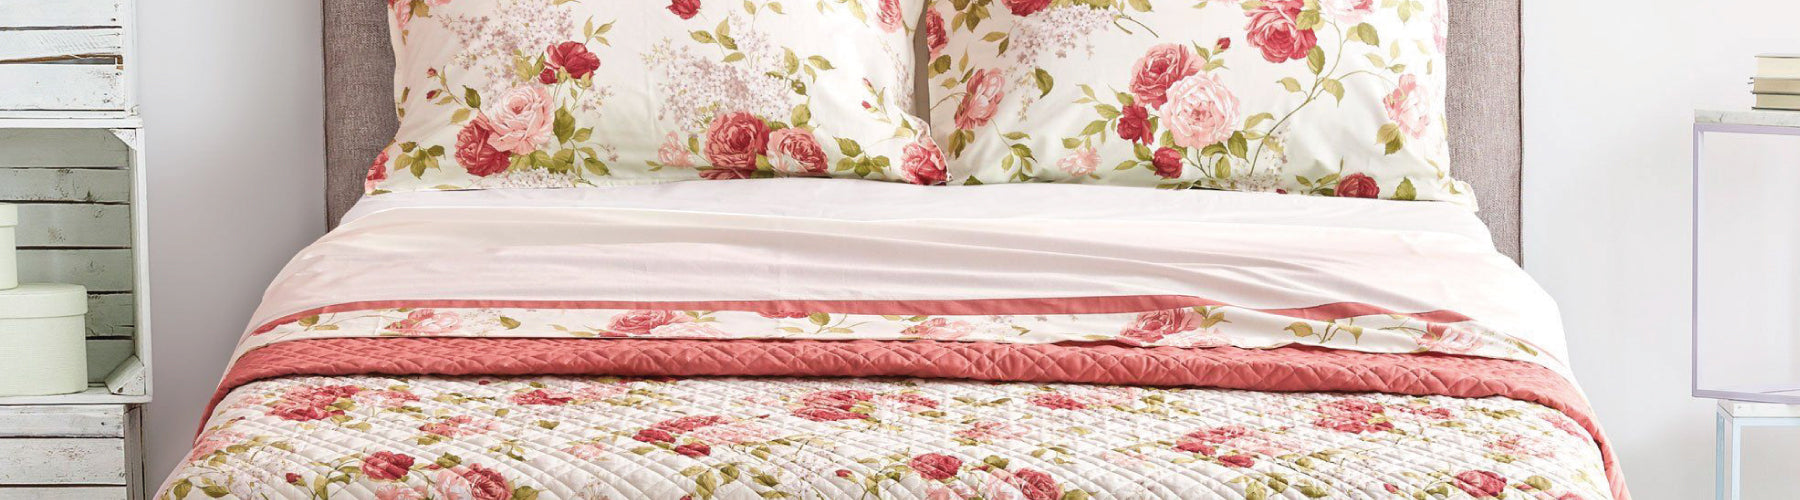 Bedspreads and Quilts